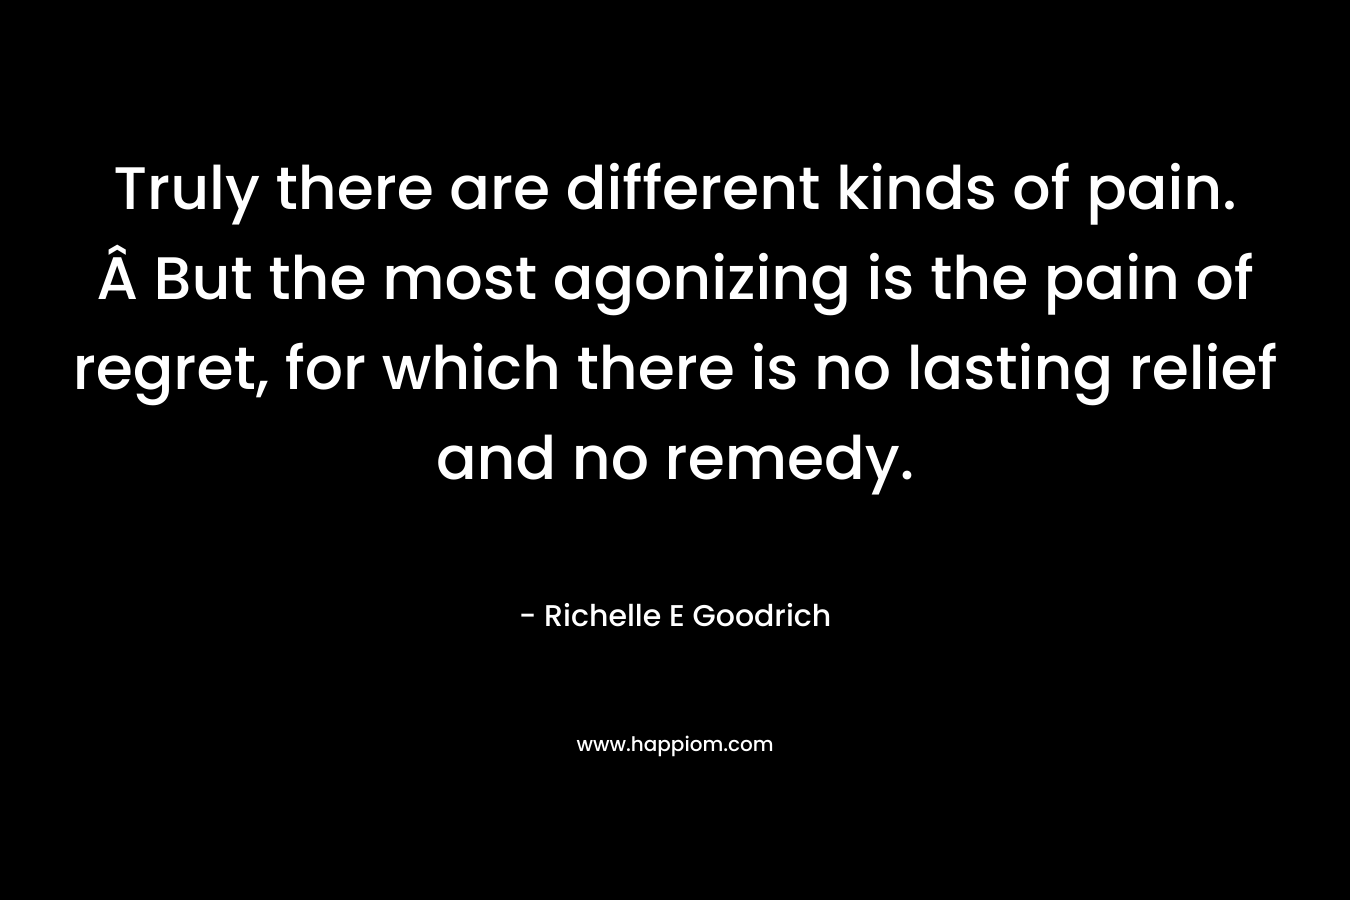 Truly there are different kinds of pain. Â But the most agonizing is the pain of regret, for which there is no lasting relief and no remedy. – Richelle E Goodrich